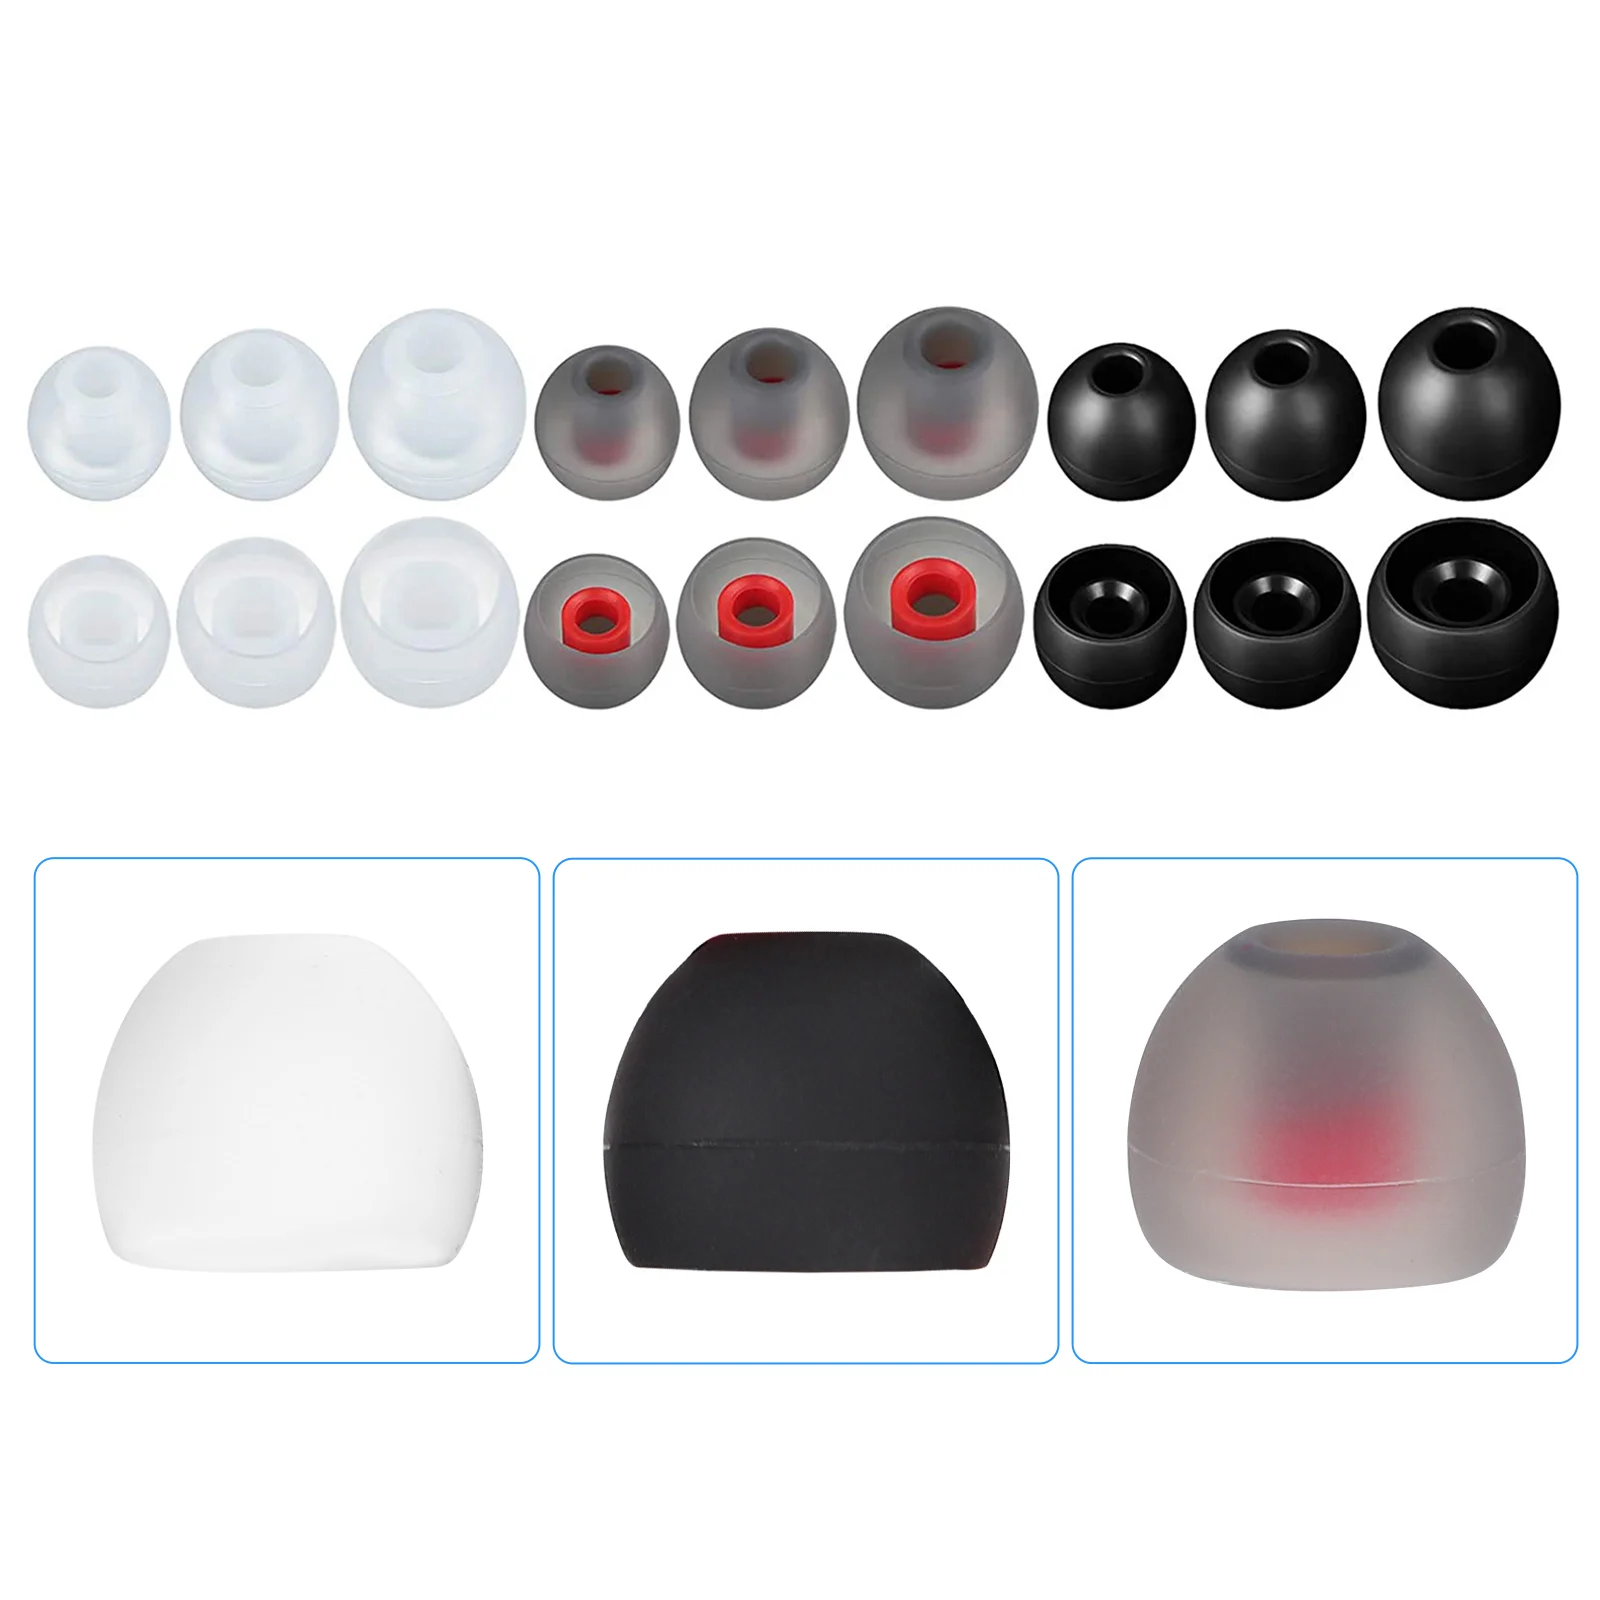 

36pcs Silicone Earphone Replacement Covers Earphone Caps Earbuds Accessory